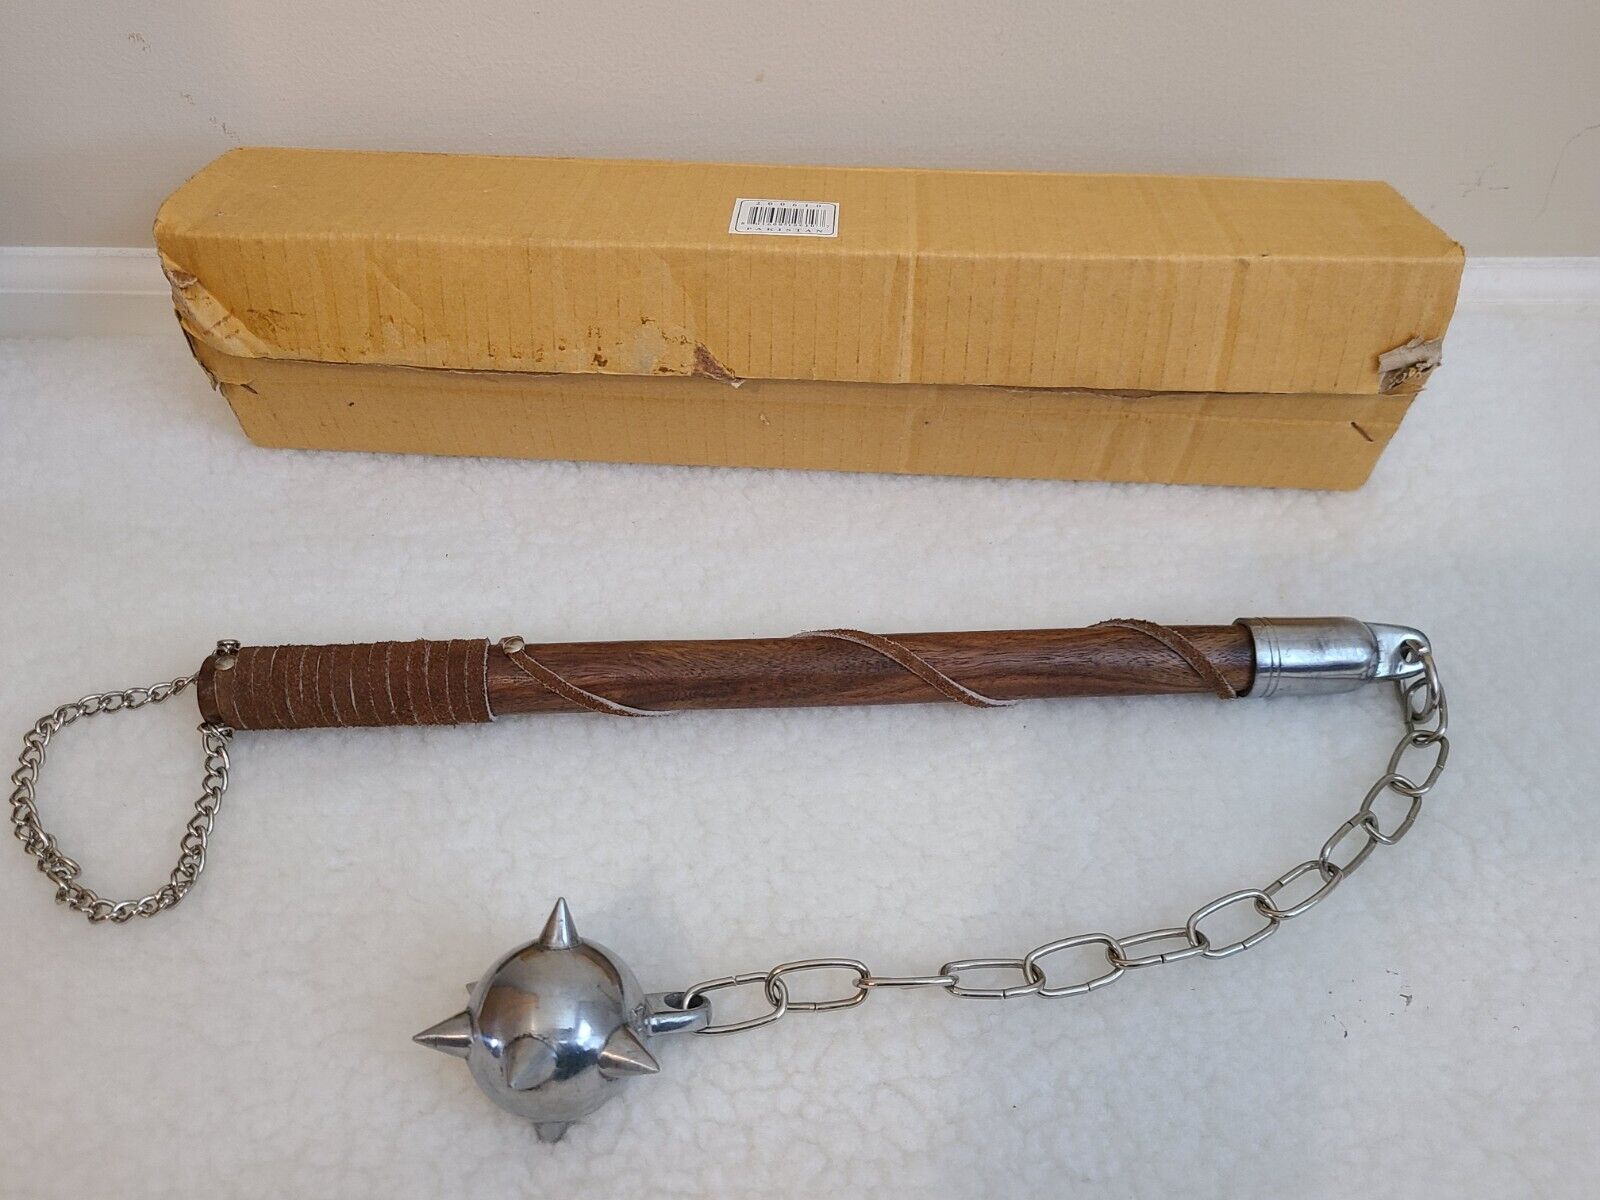 Spiked Metal Mace Ball Flail Morningstar Weapon Prop